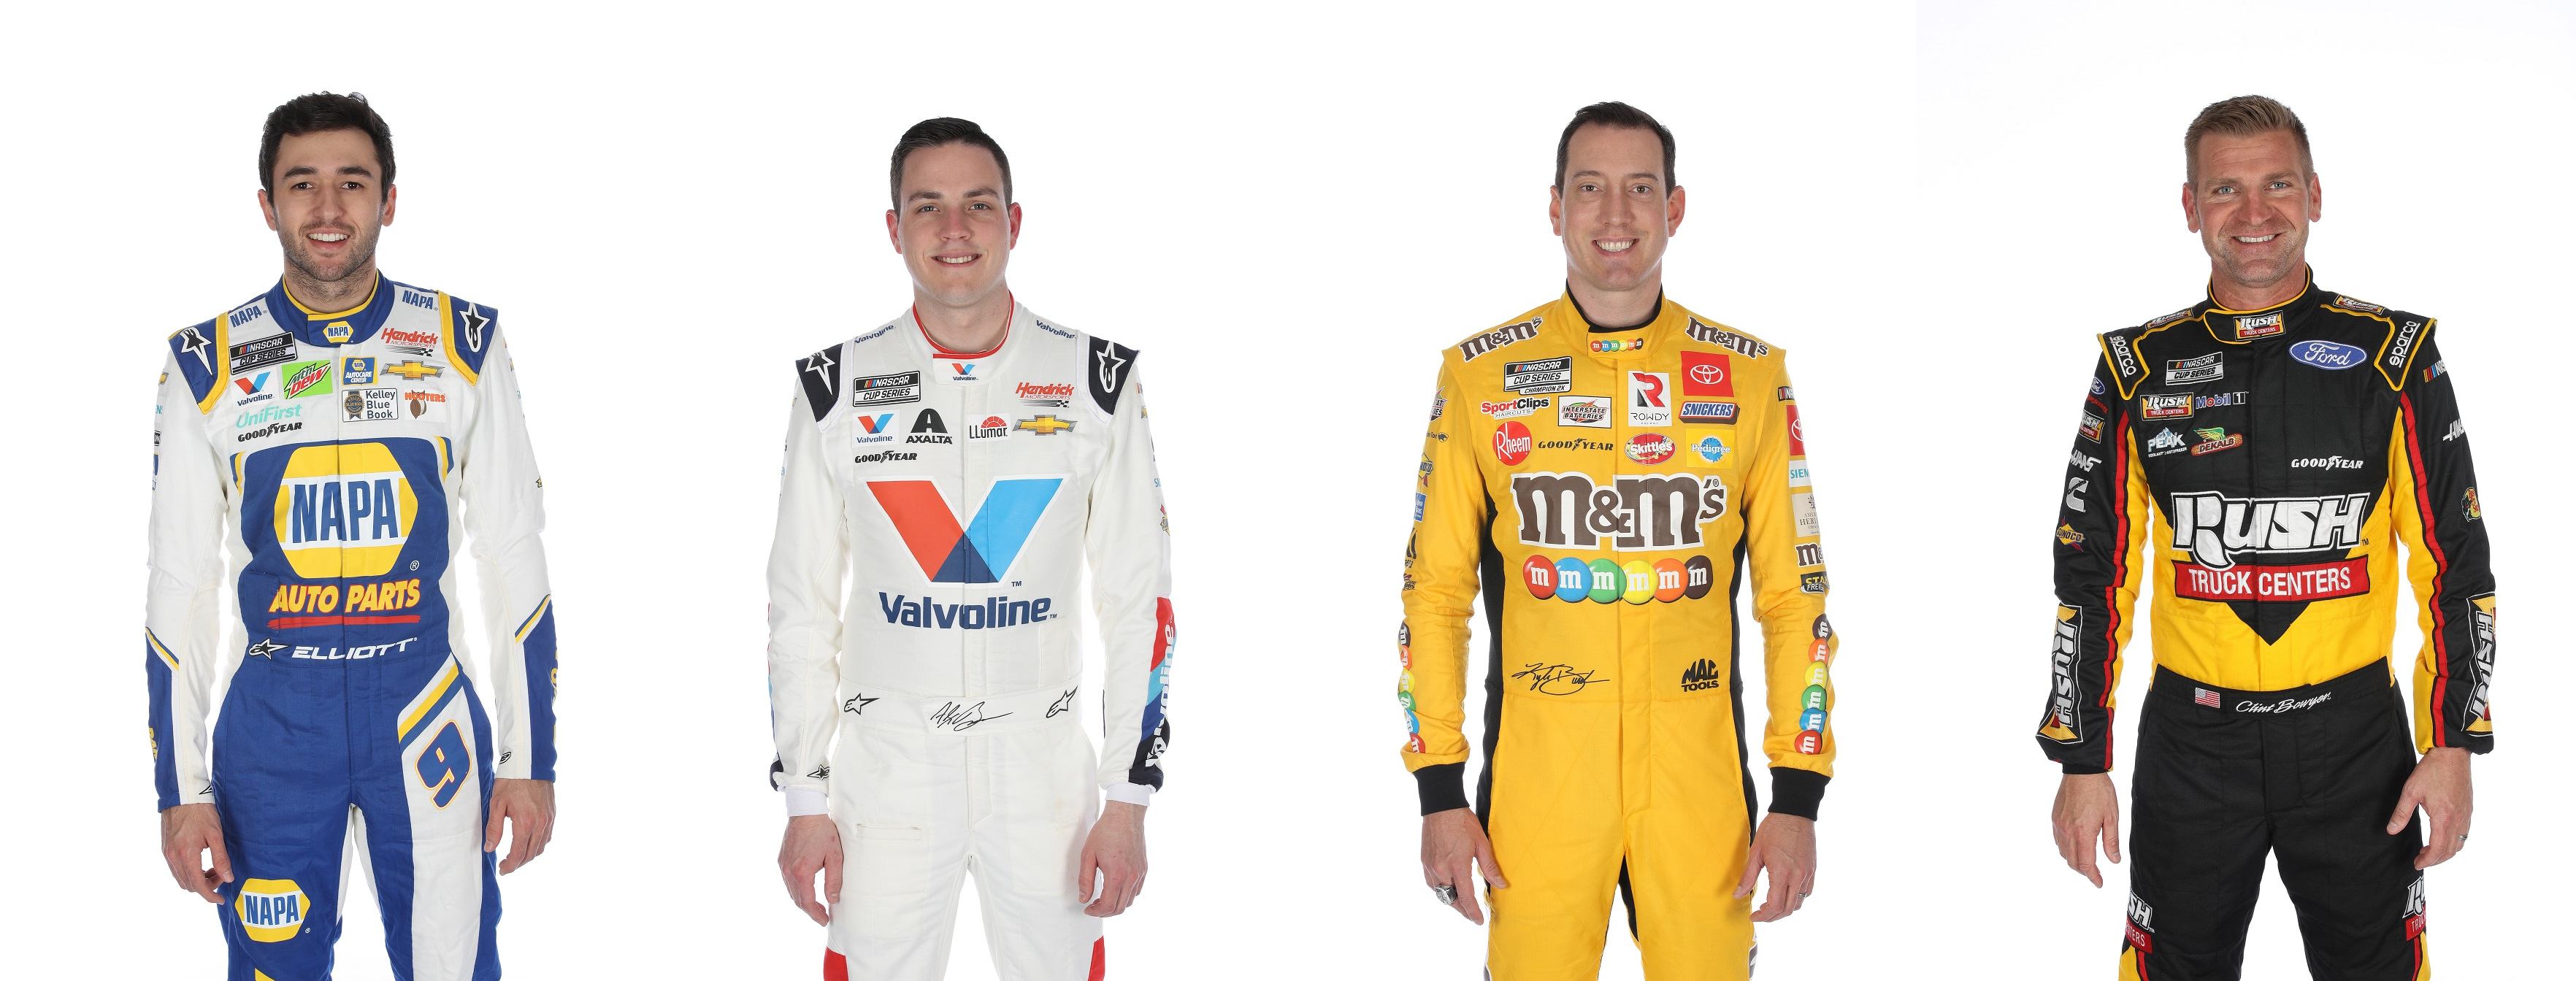 All things considered, it's quite a Fab Four with today's Bank of America ROVAL 400.